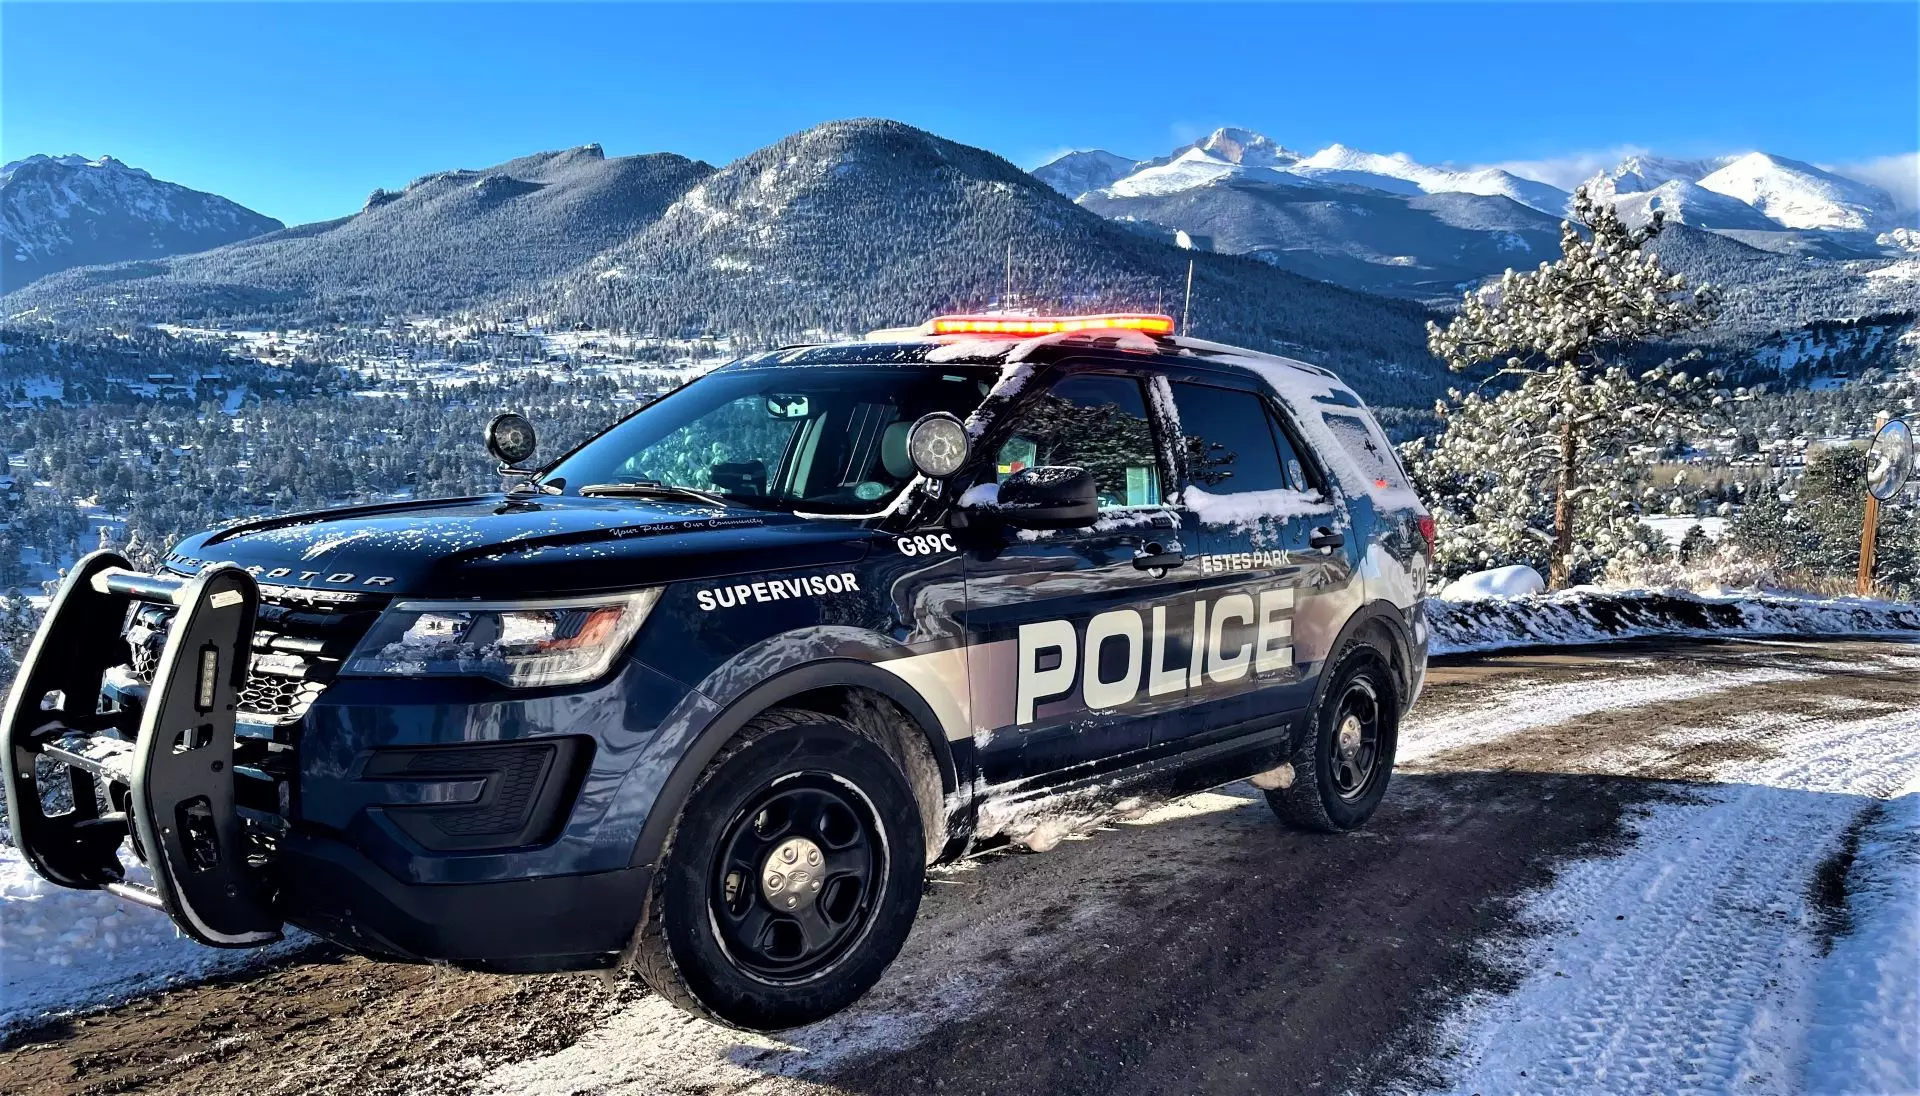 Estes Park Police patrol vehicle with snow capped peaks in background